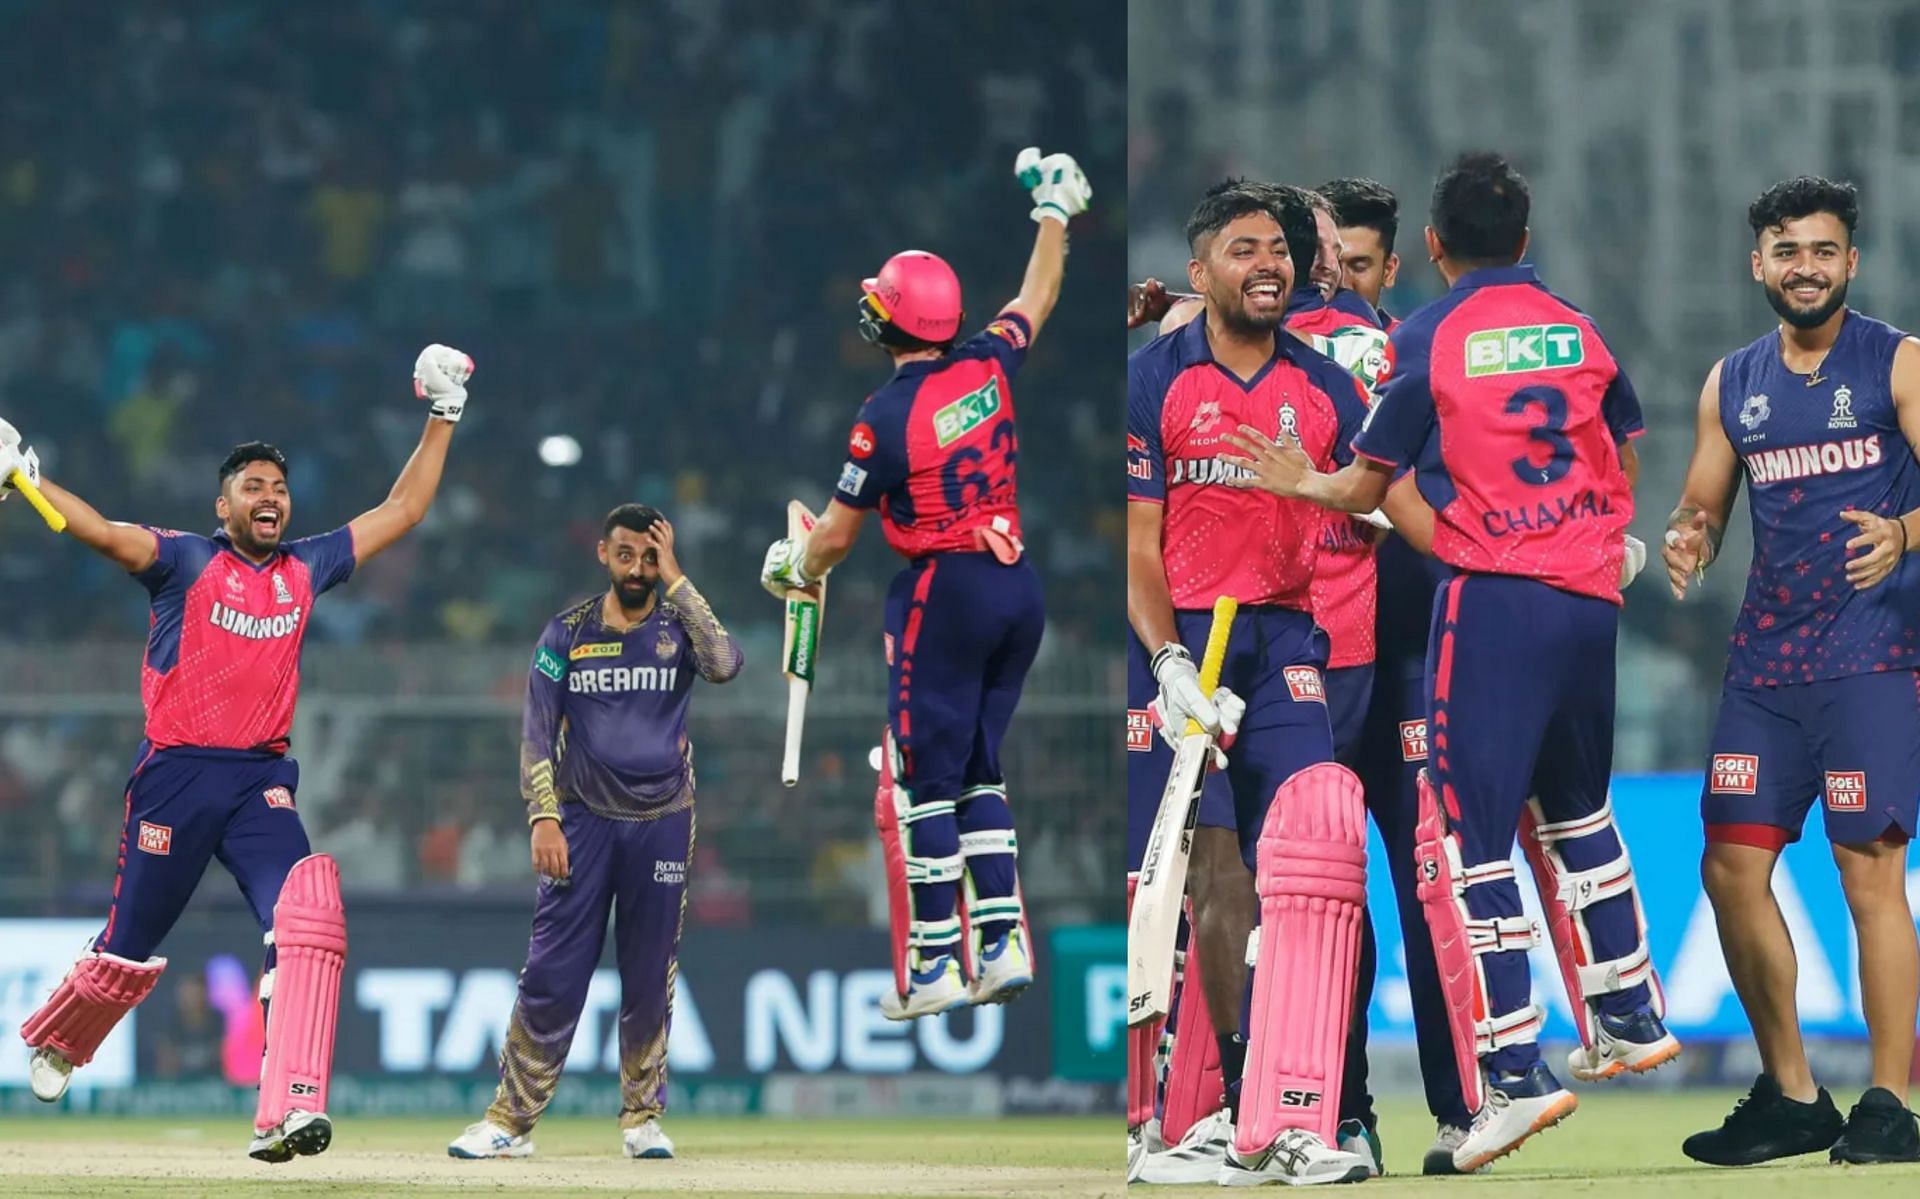 Jos Buttler celebrating the win with his teammates. (PC: BCCI)